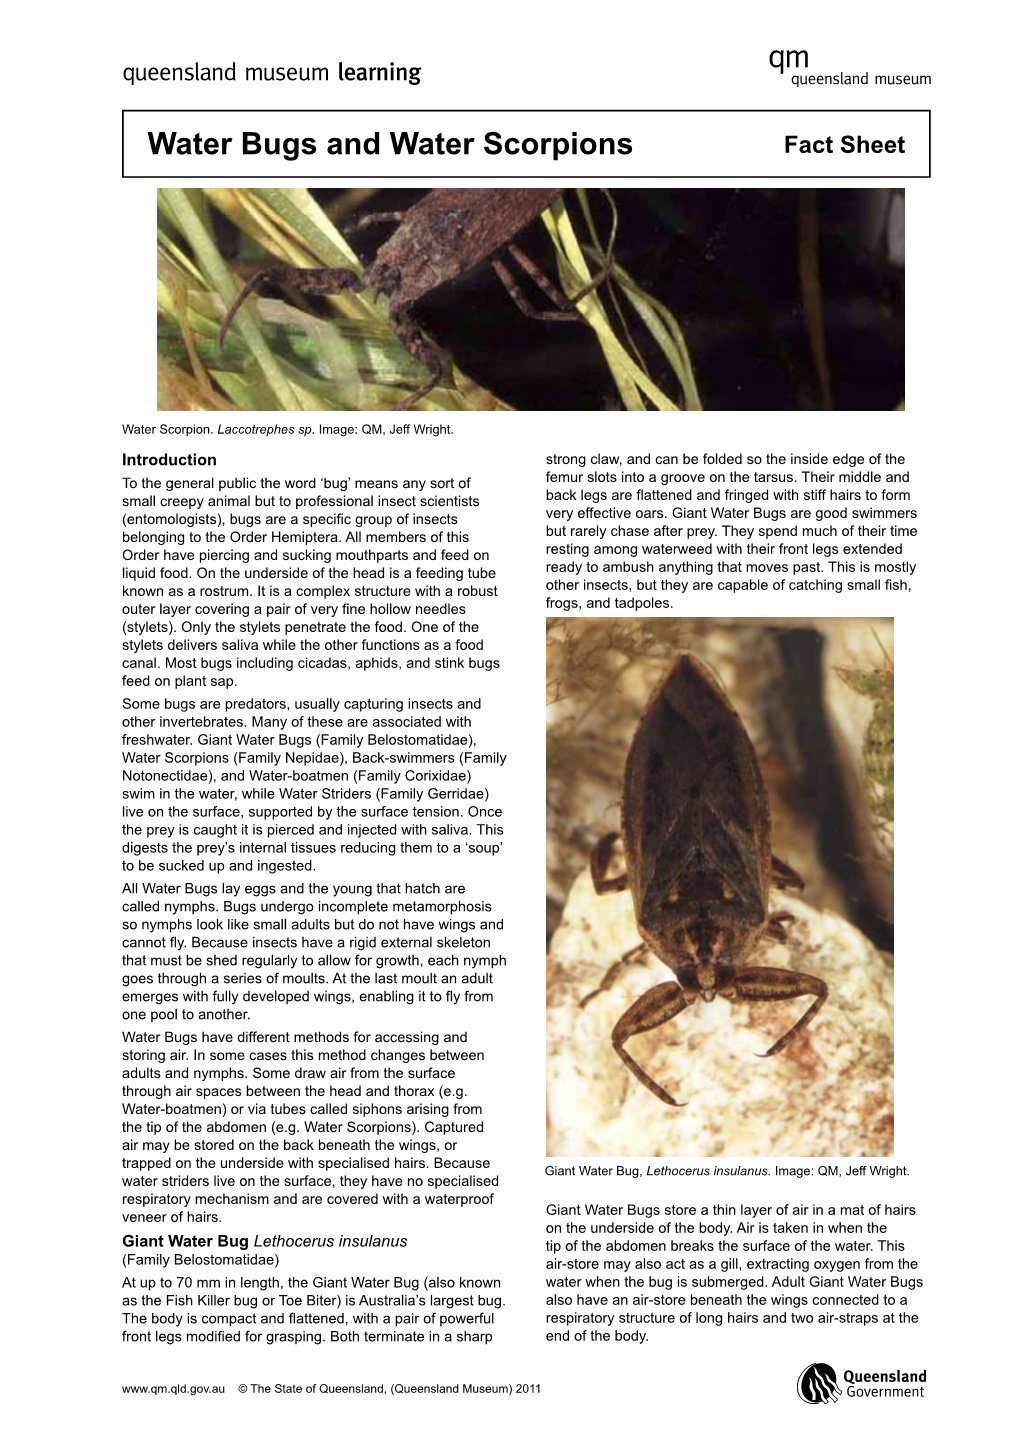 Water Bugs and Water Scorpions Fact Sheet